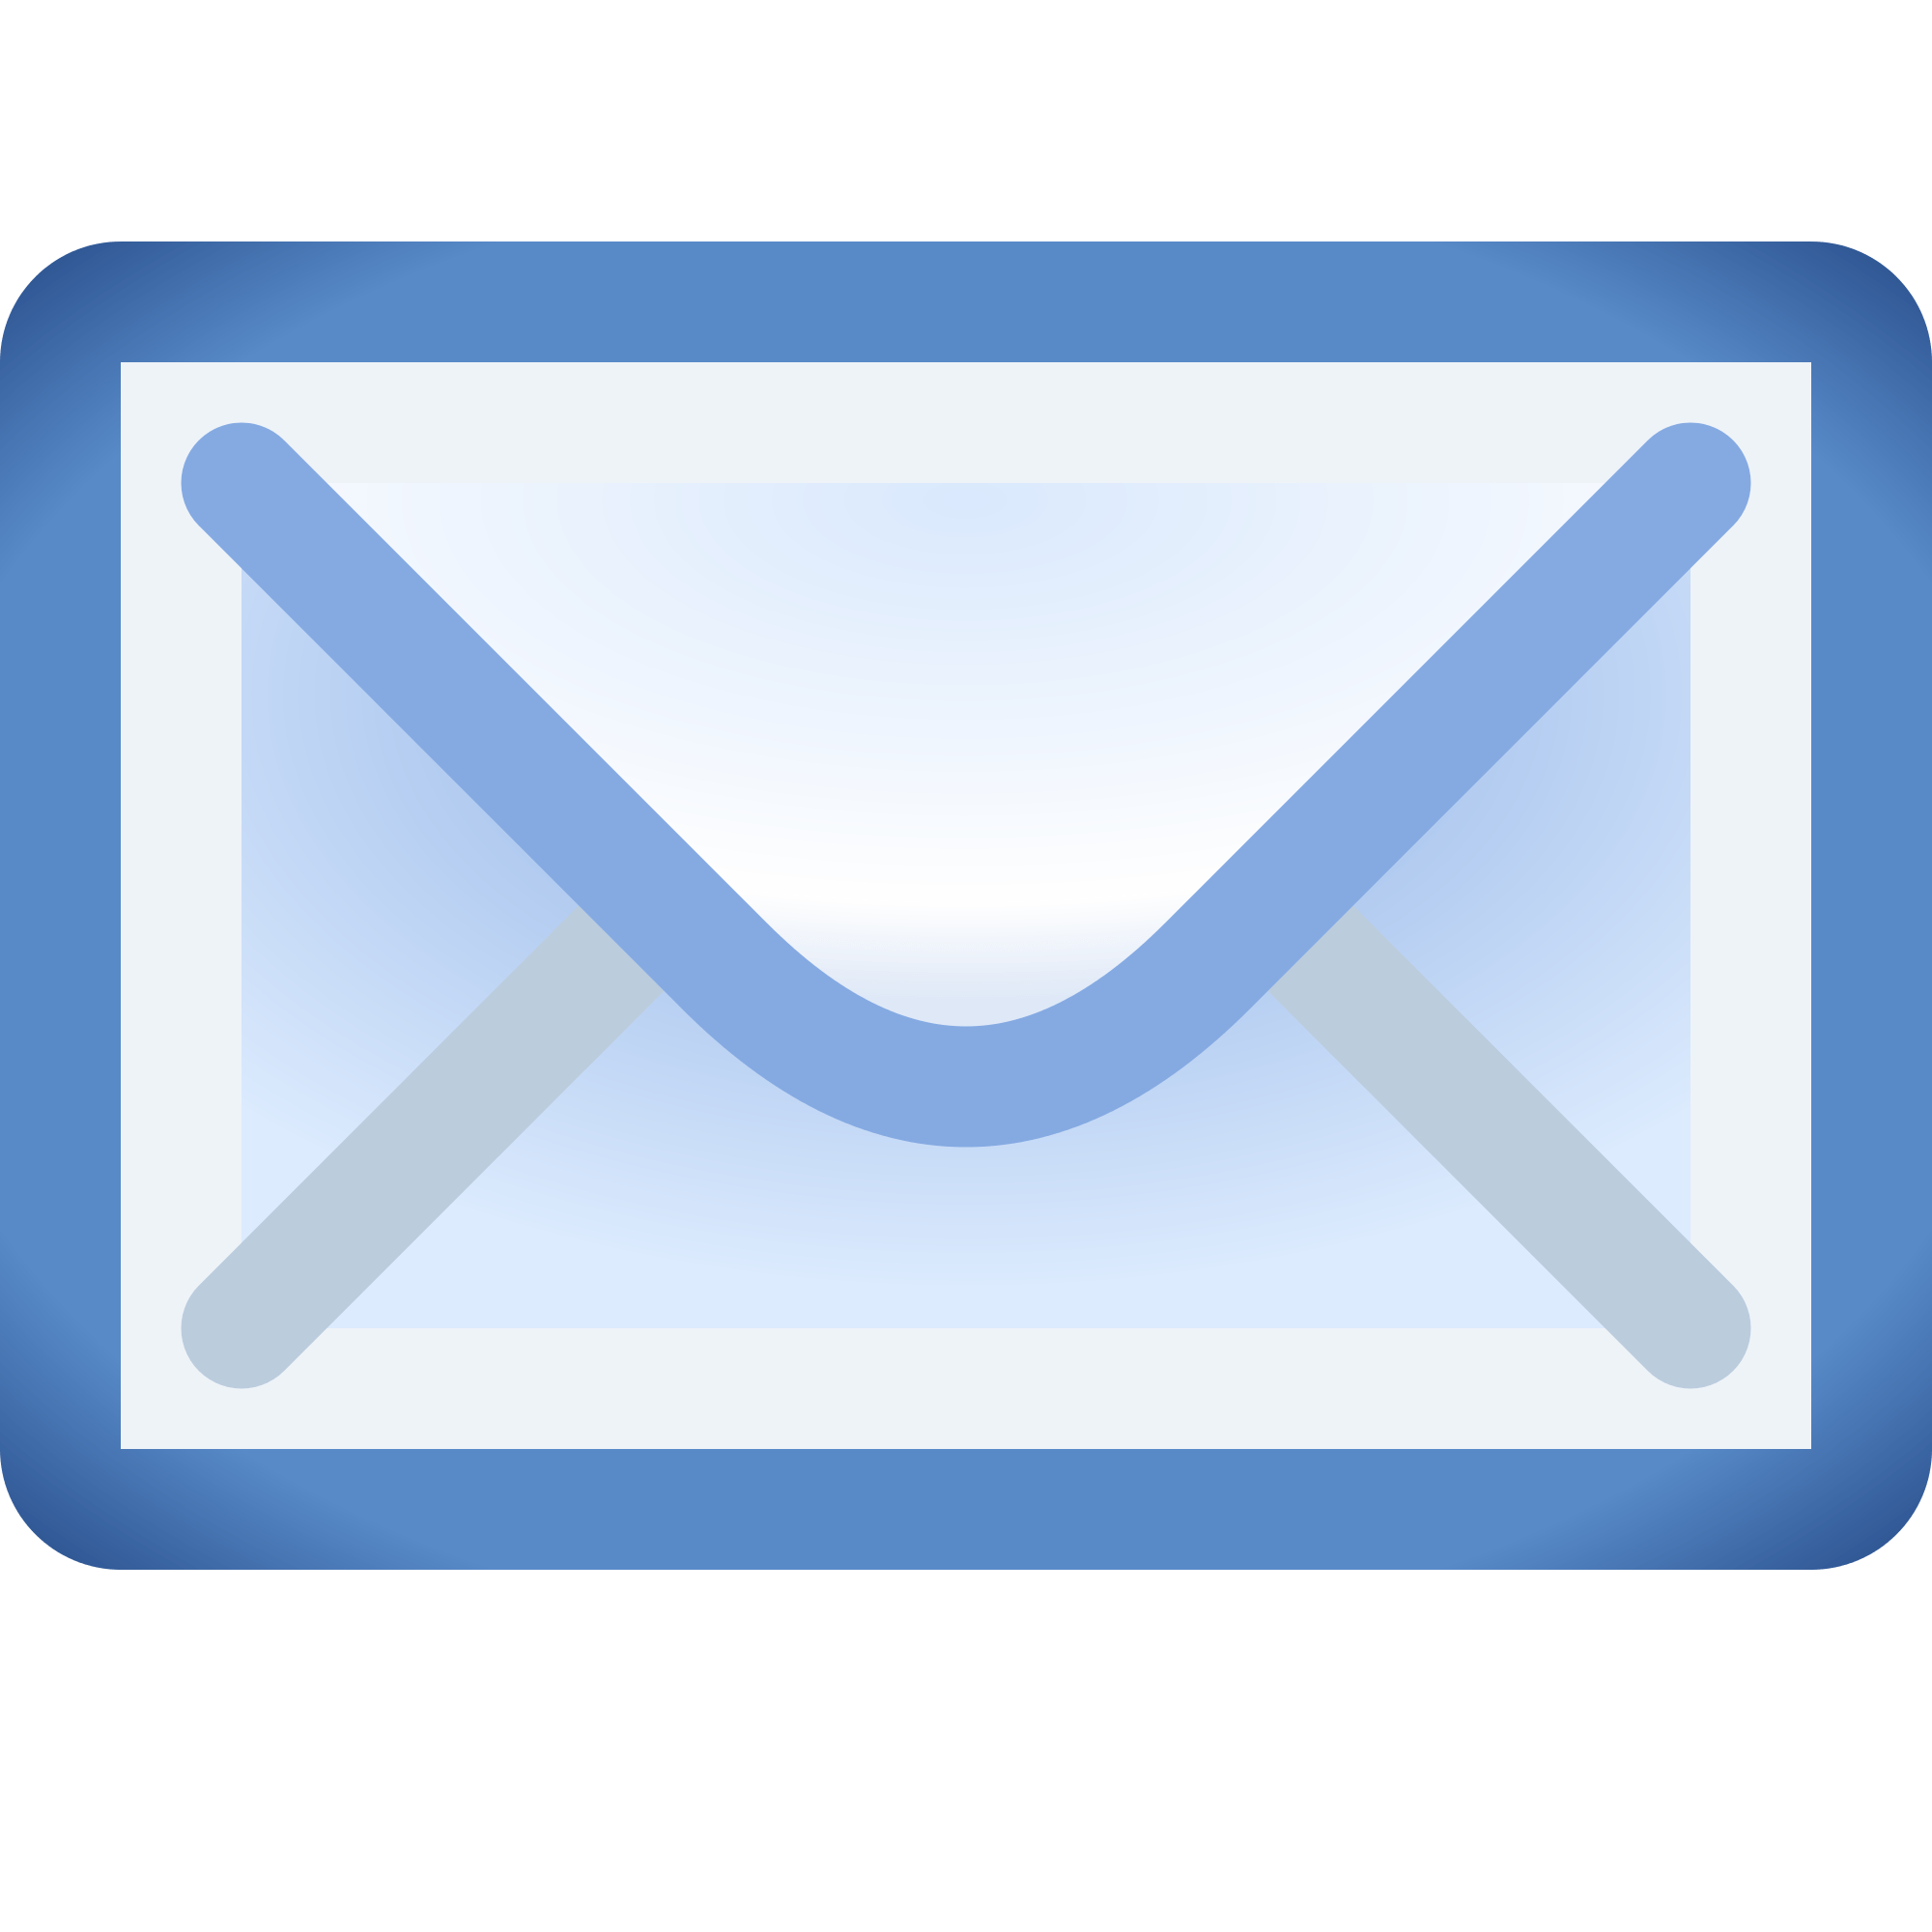 email clipart email etiquette